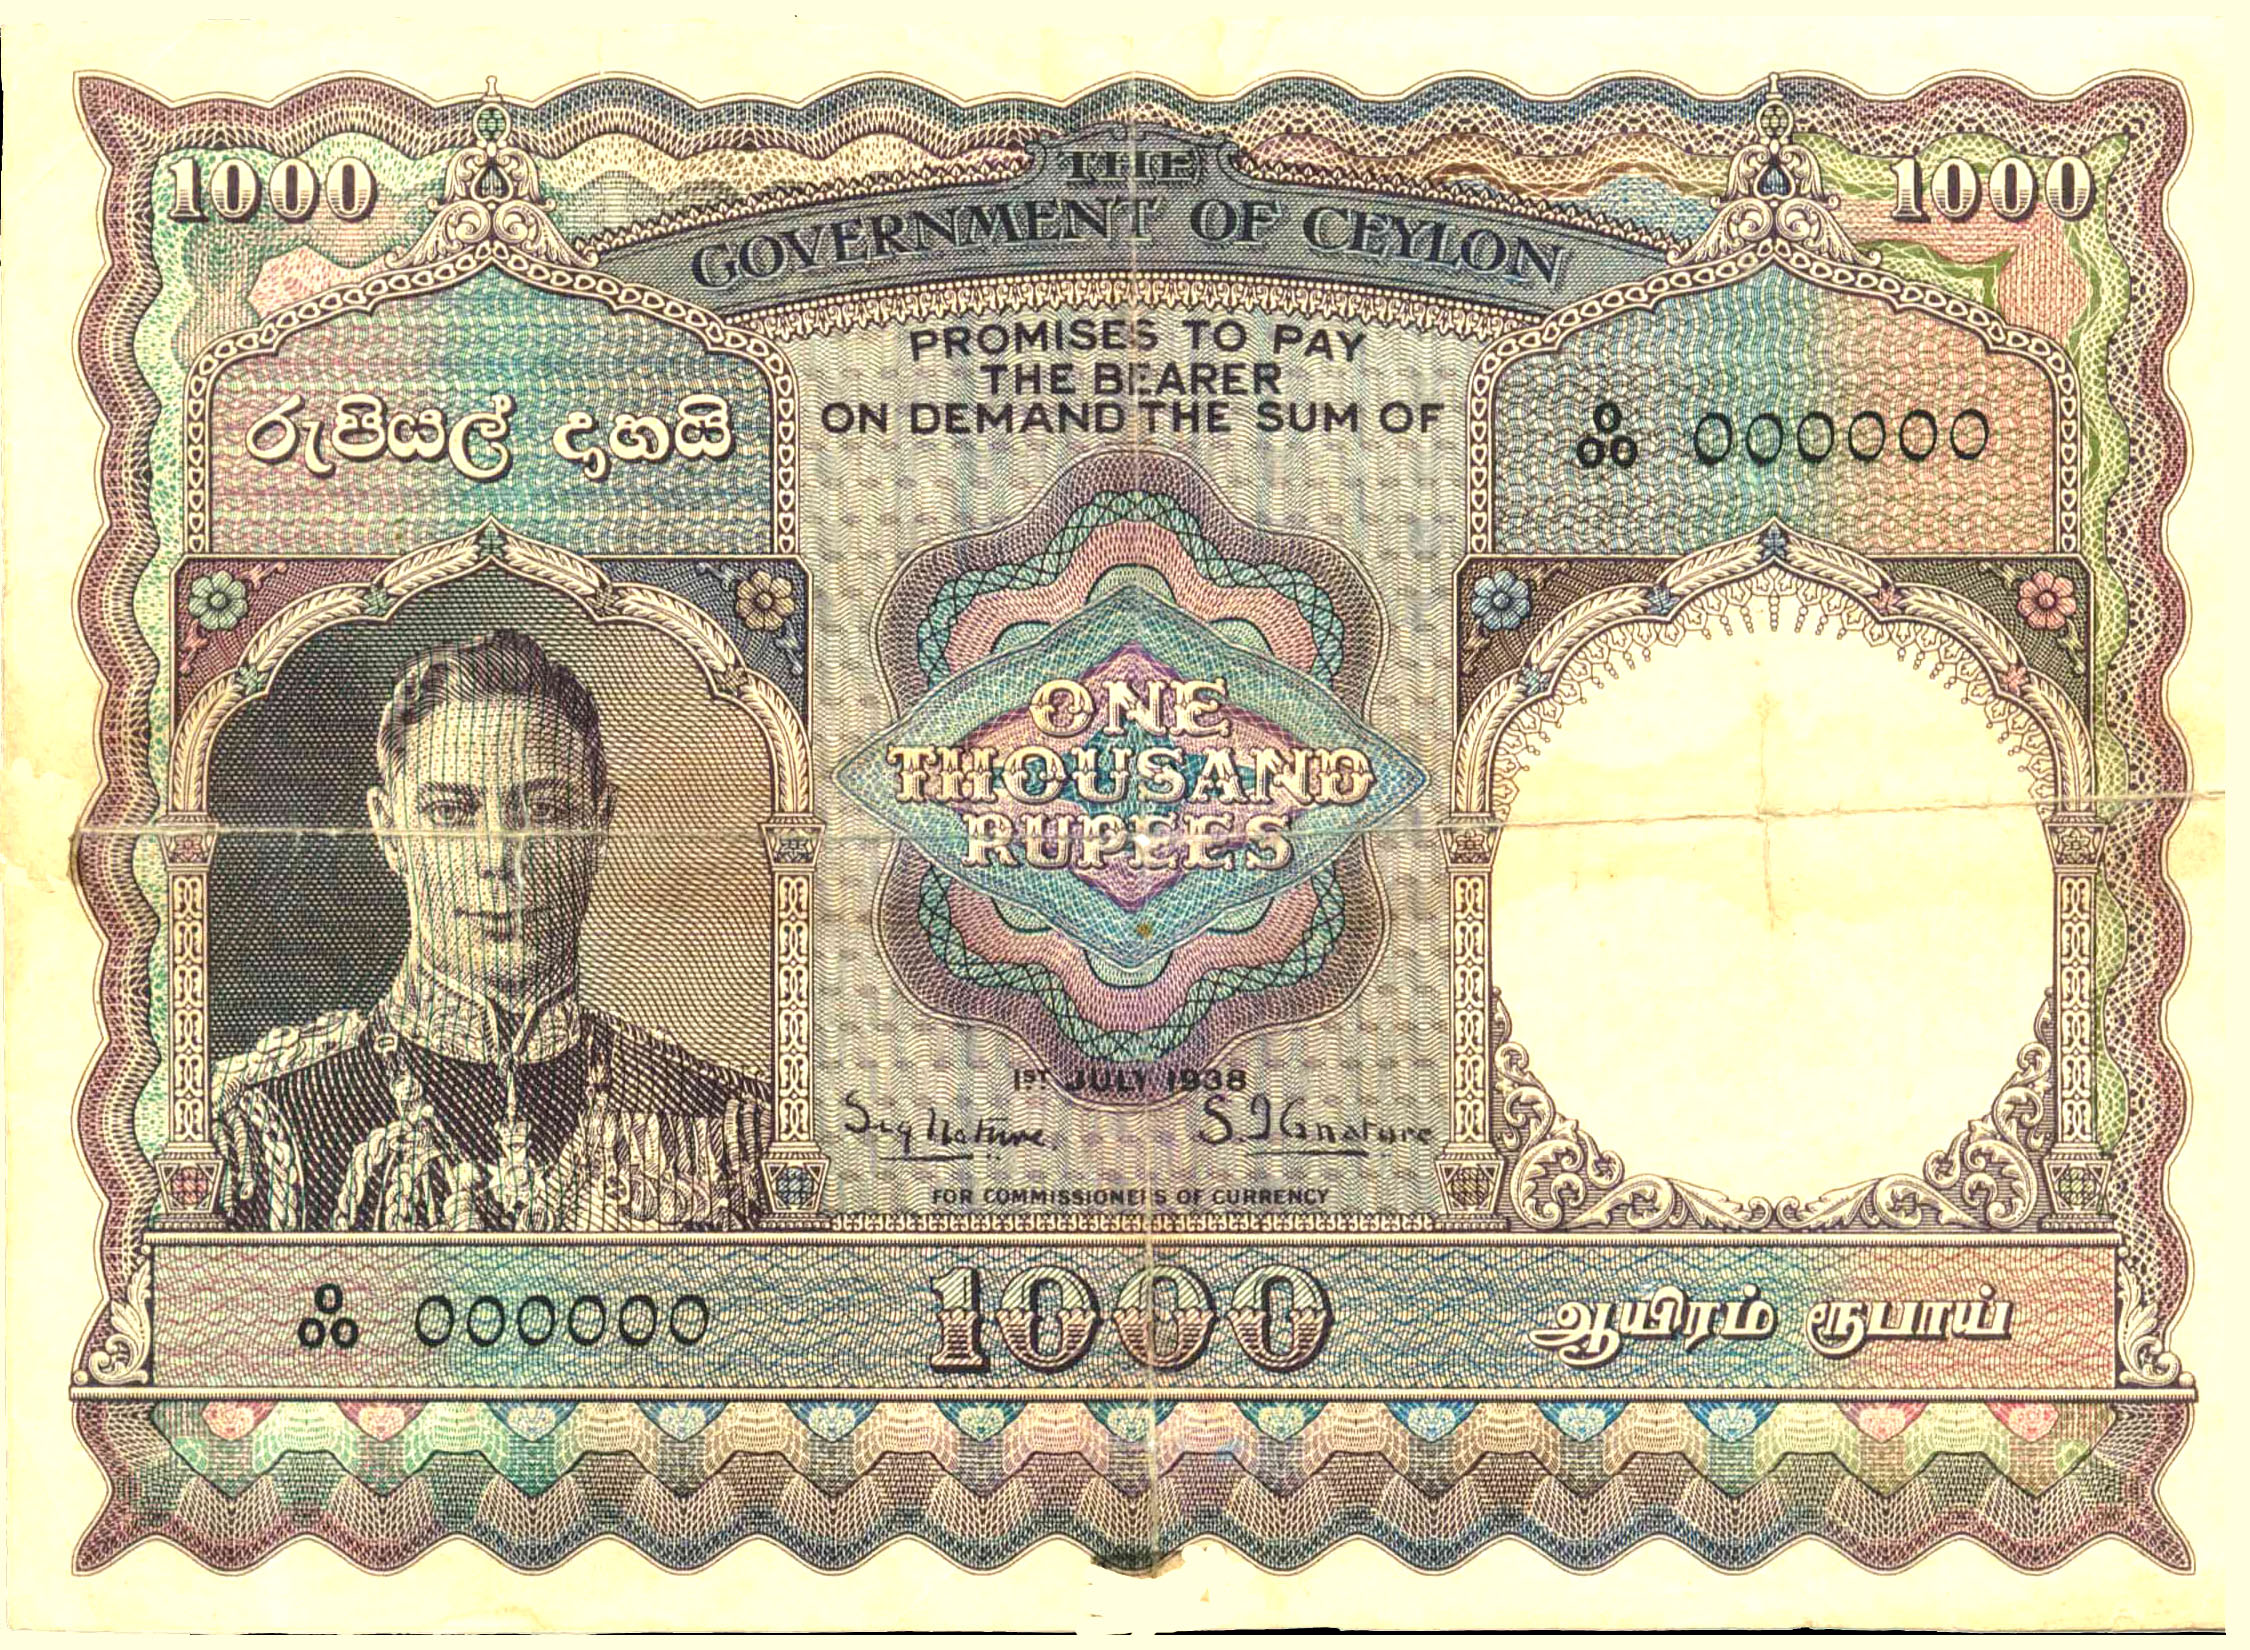 1938_kgvi_r1000_front